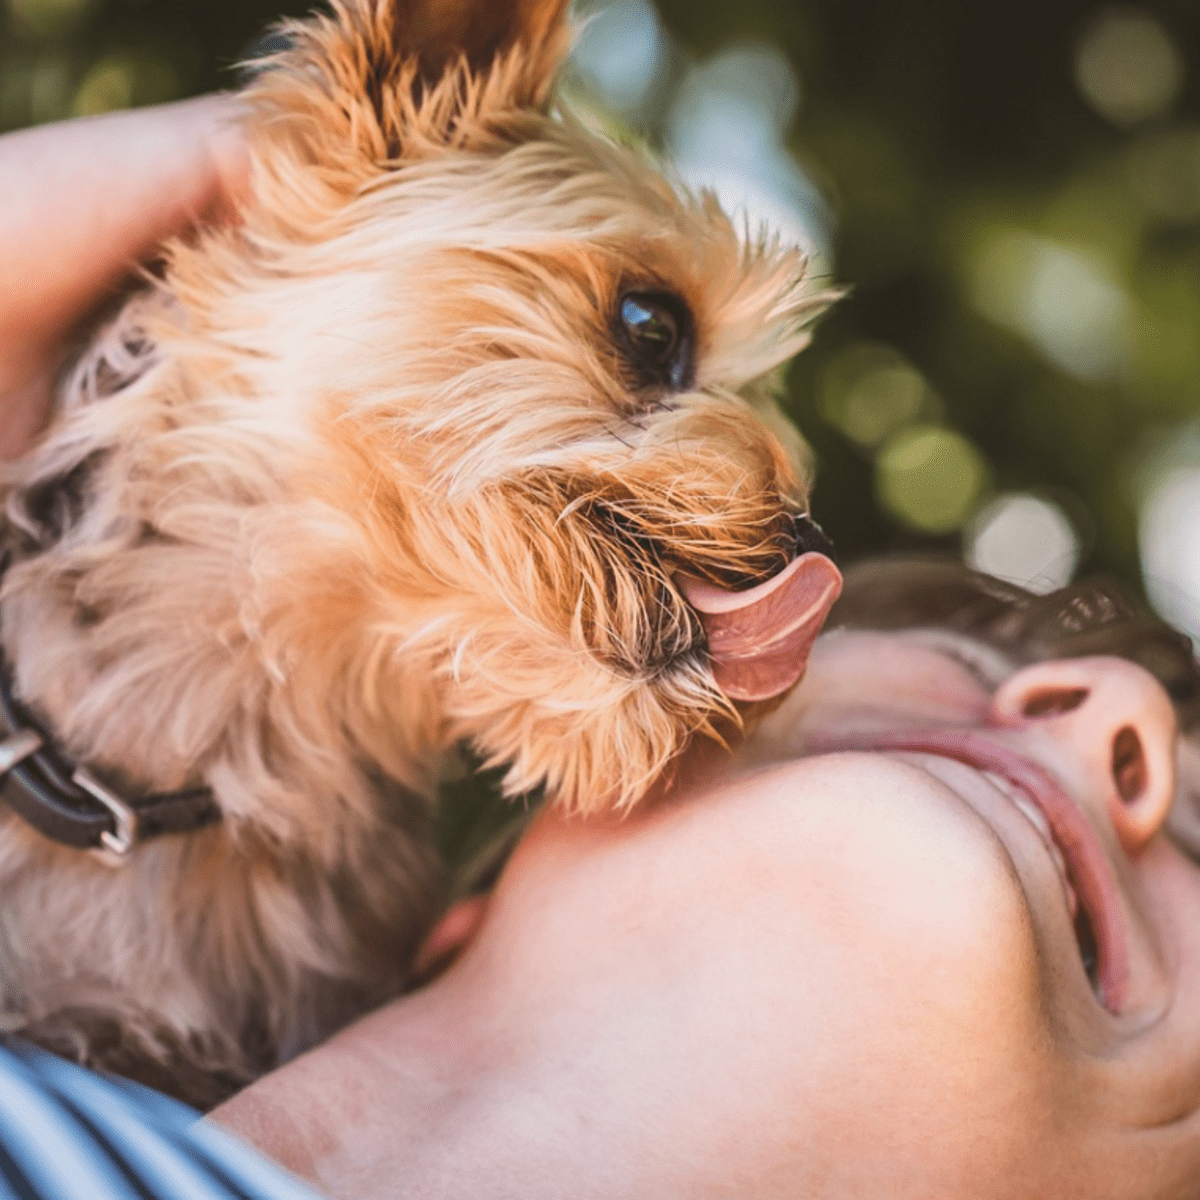 Lickety-split: How to teach your dog to stop licking people